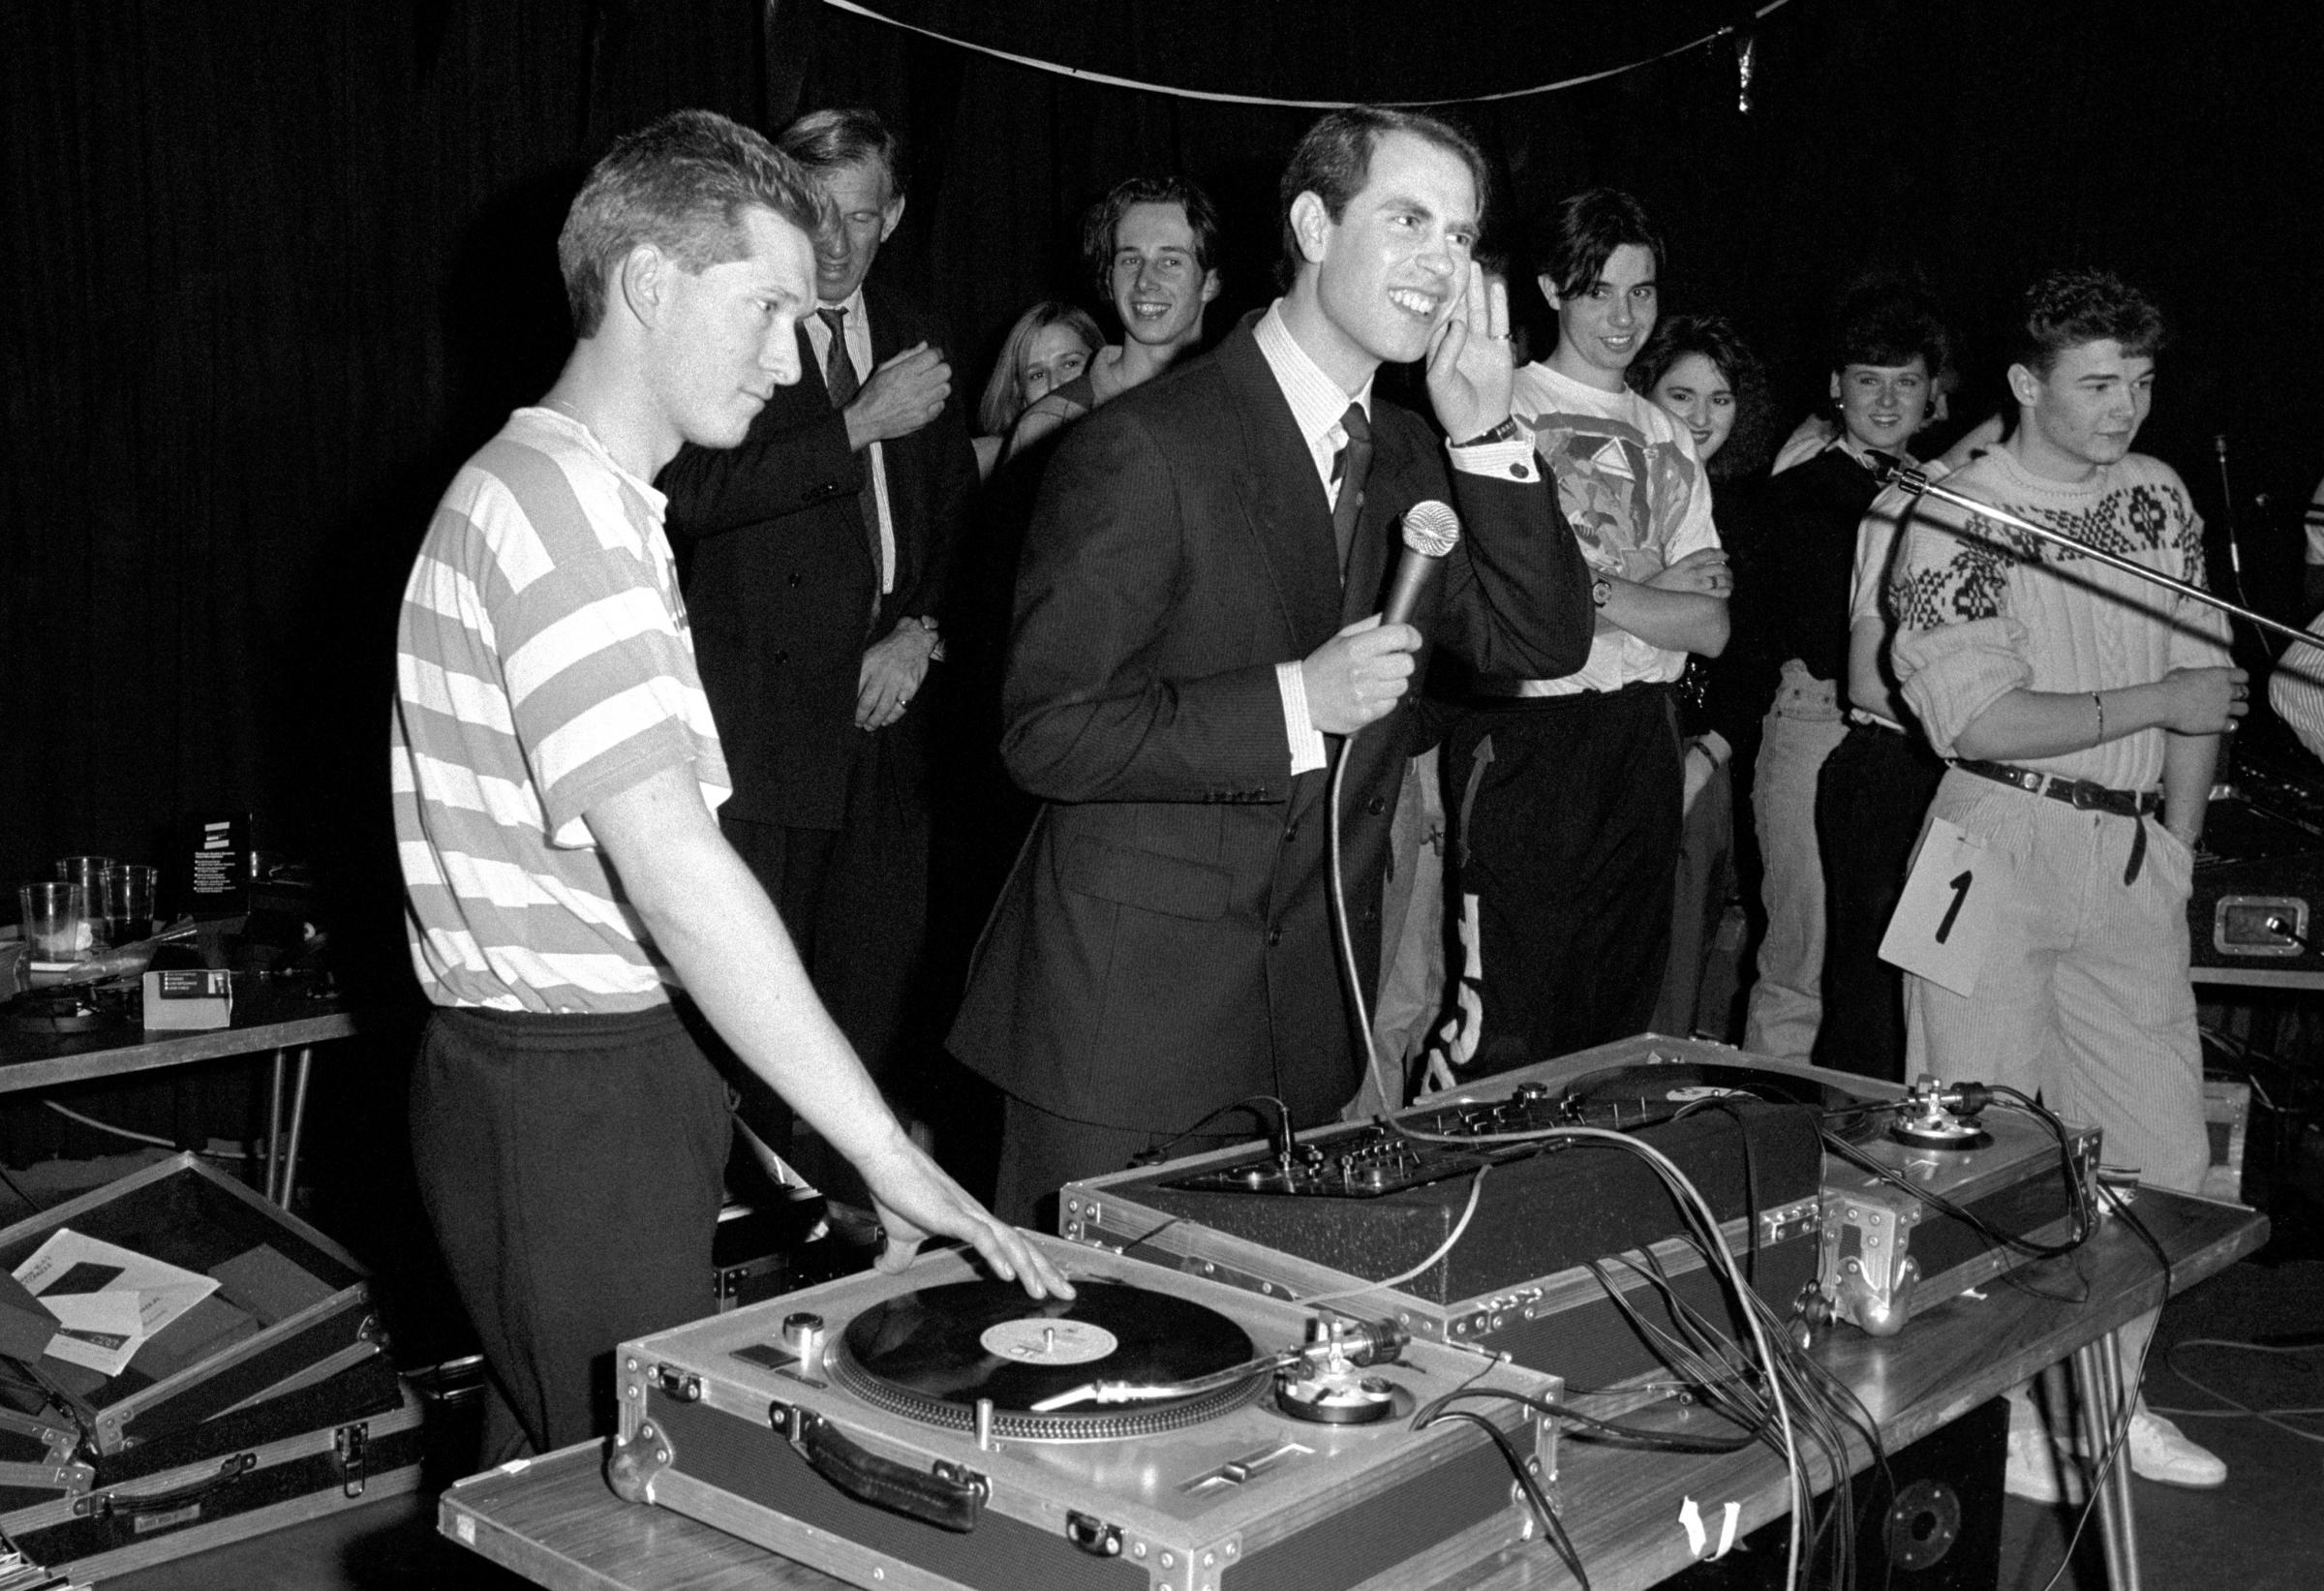 Pump the volume - Prince Edward takes over from DJ Andi Bird (left) at a 24 hour sponsored disco dance in 1989